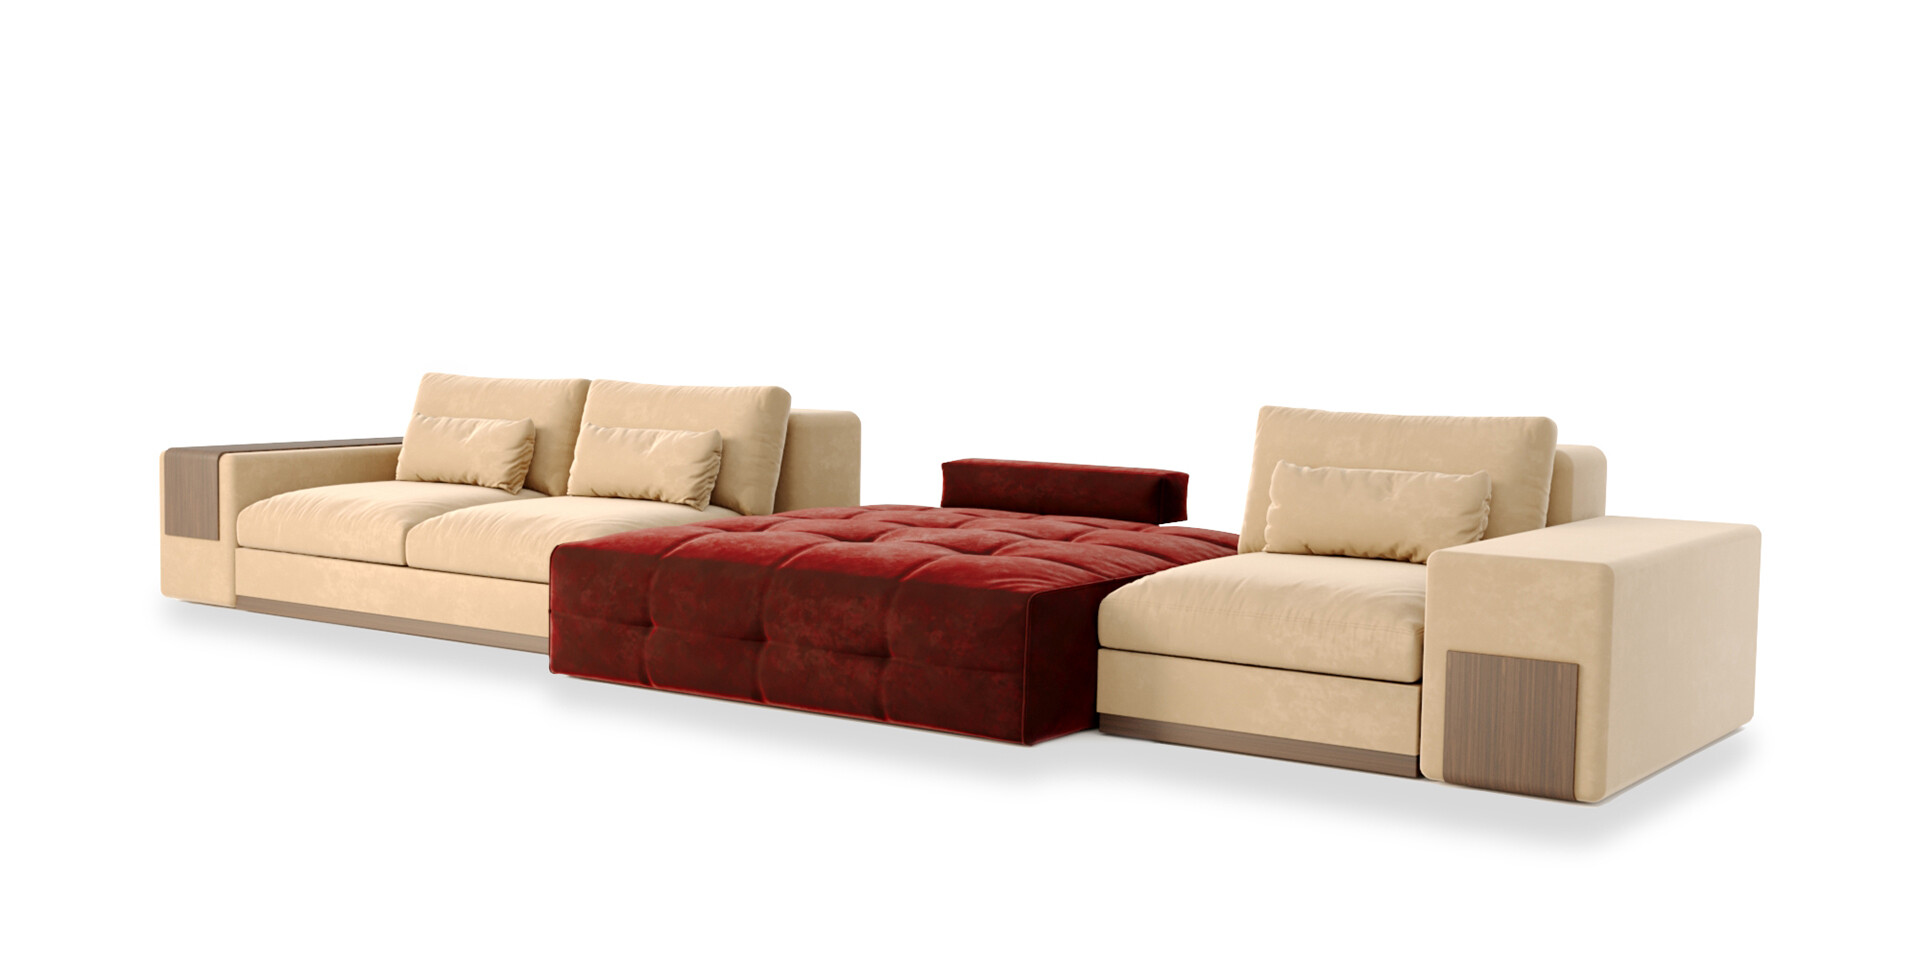 MIES 3 Seat Sofa + Middle Chaise_Perpective Front View_ALMA de LUCE